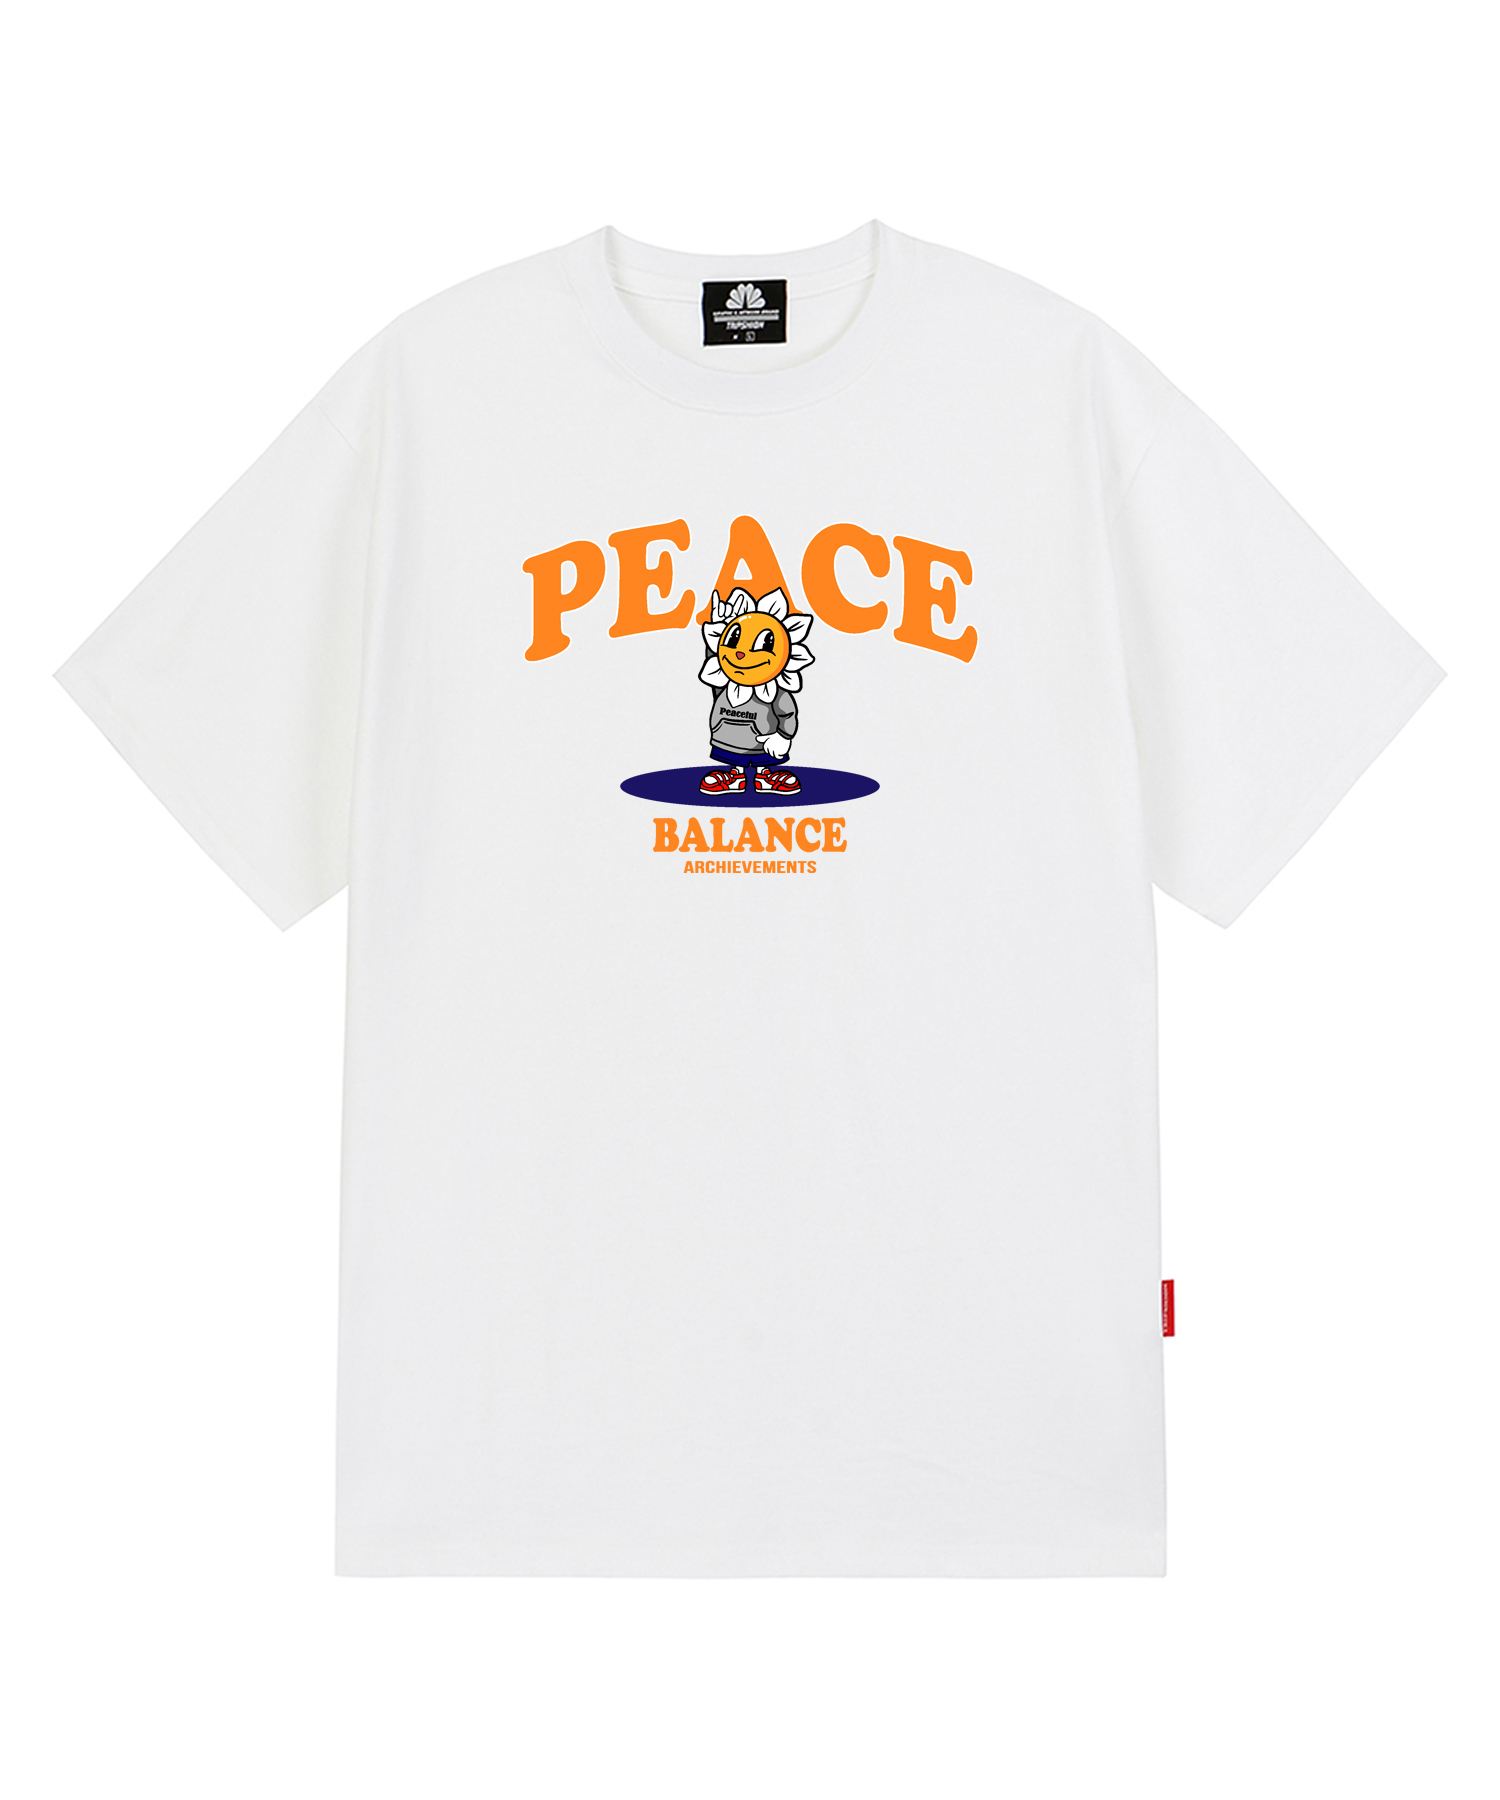 PEACE TIGER GRAPHIC T-SHIRTS - WHITE